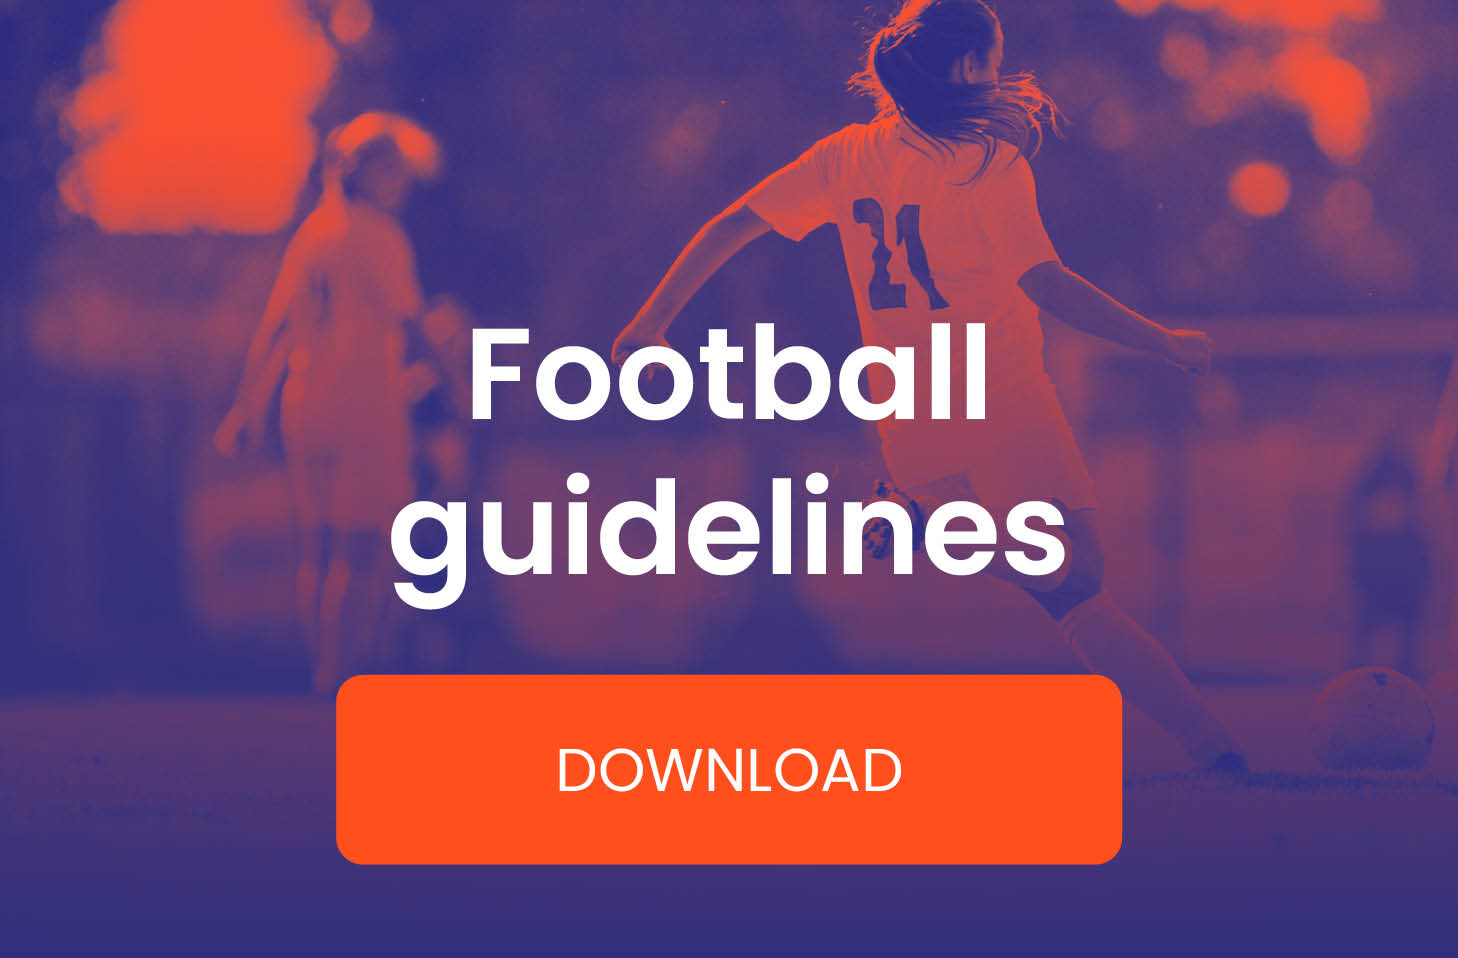 Football guidelines - download